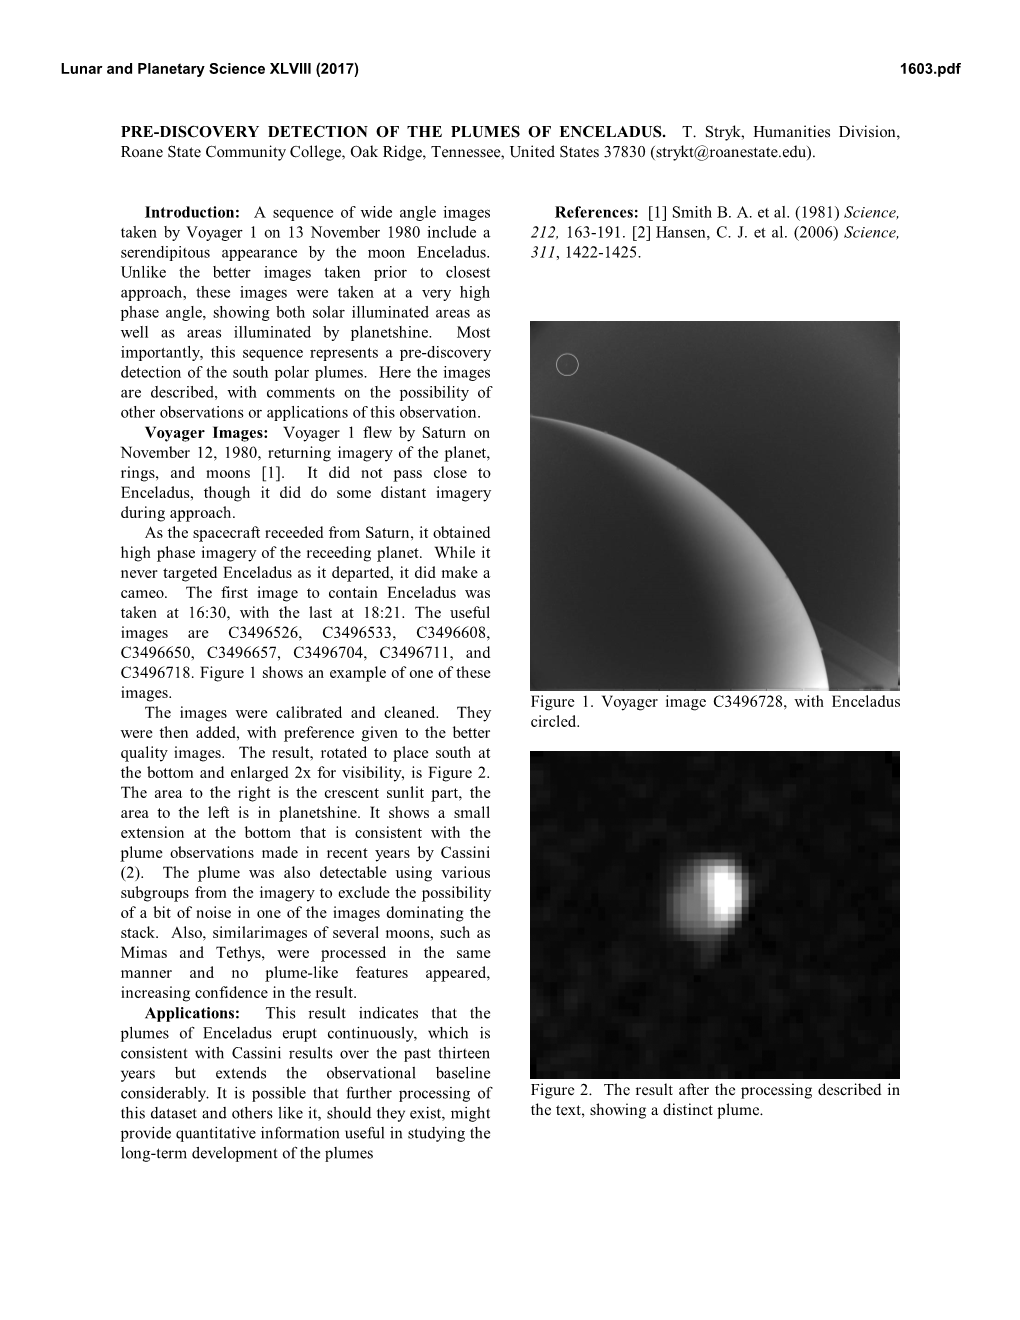 PRE-DISCOVERY DETECTION of the PLUMES of ENCELADUS. T. Stryk, Humanities Division, Roane State Community College, Oak Ridge